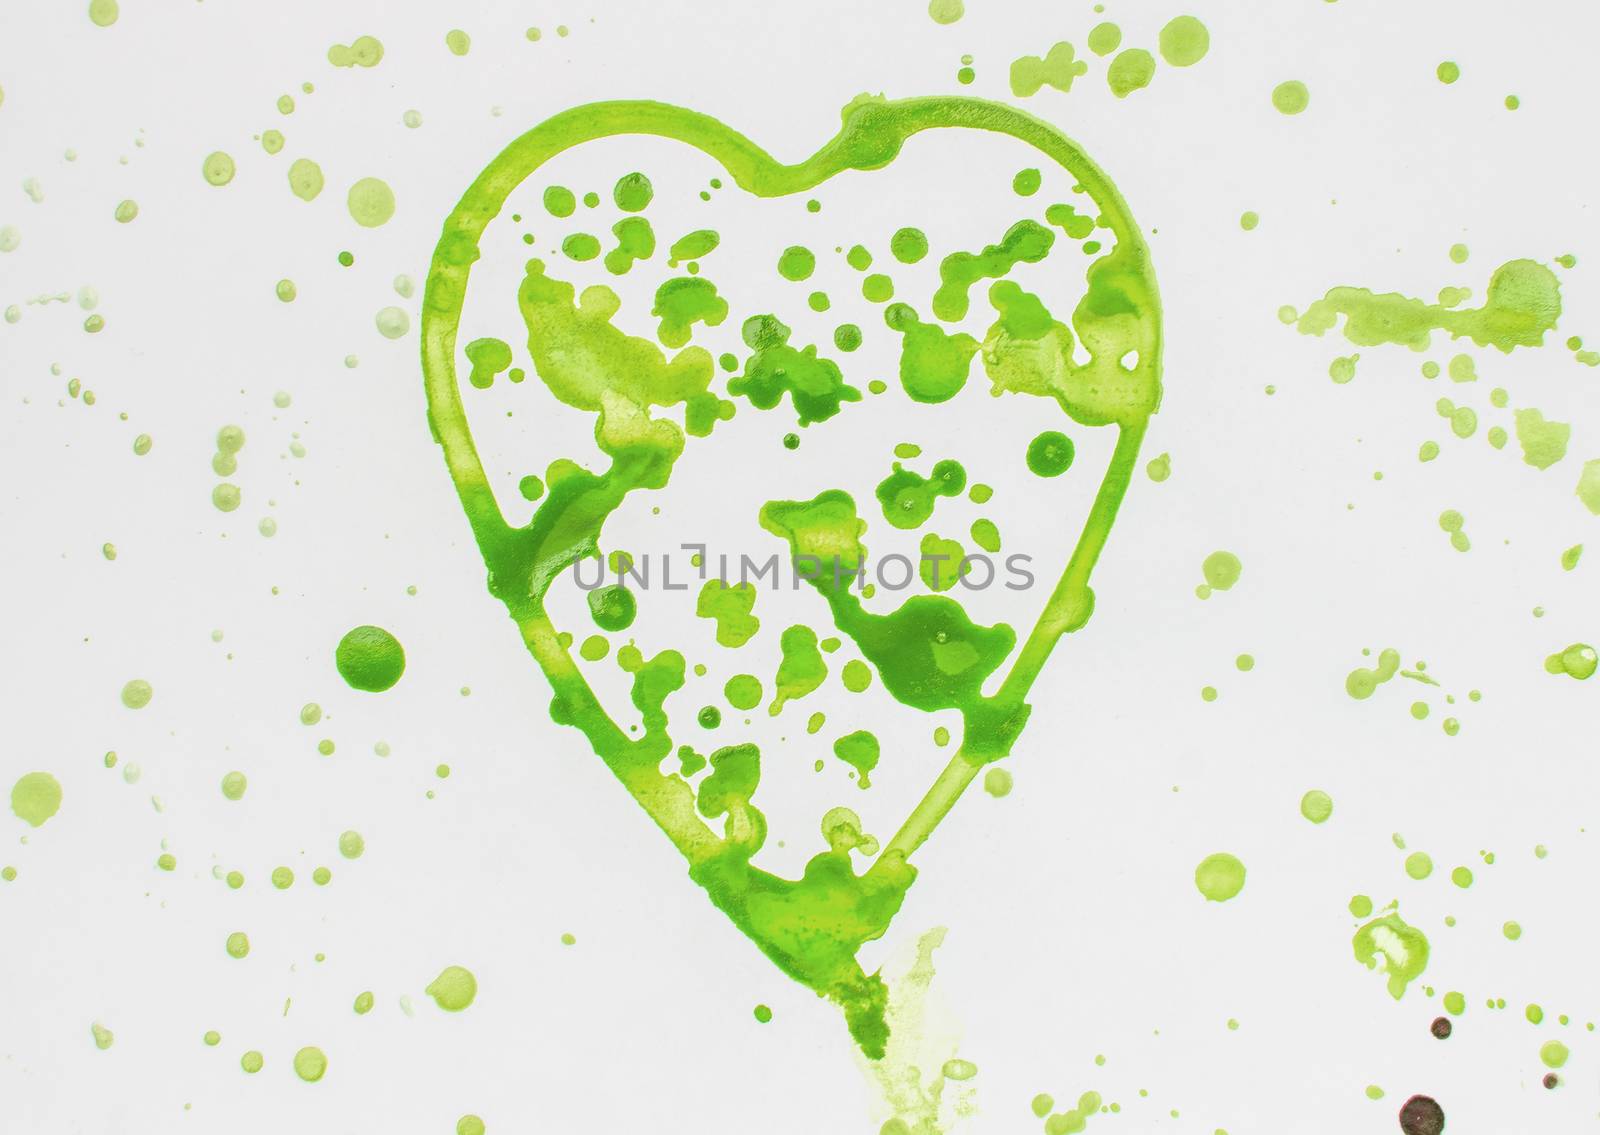 Heart with spray green watercolor on white background, cute, pattern, hand painted.